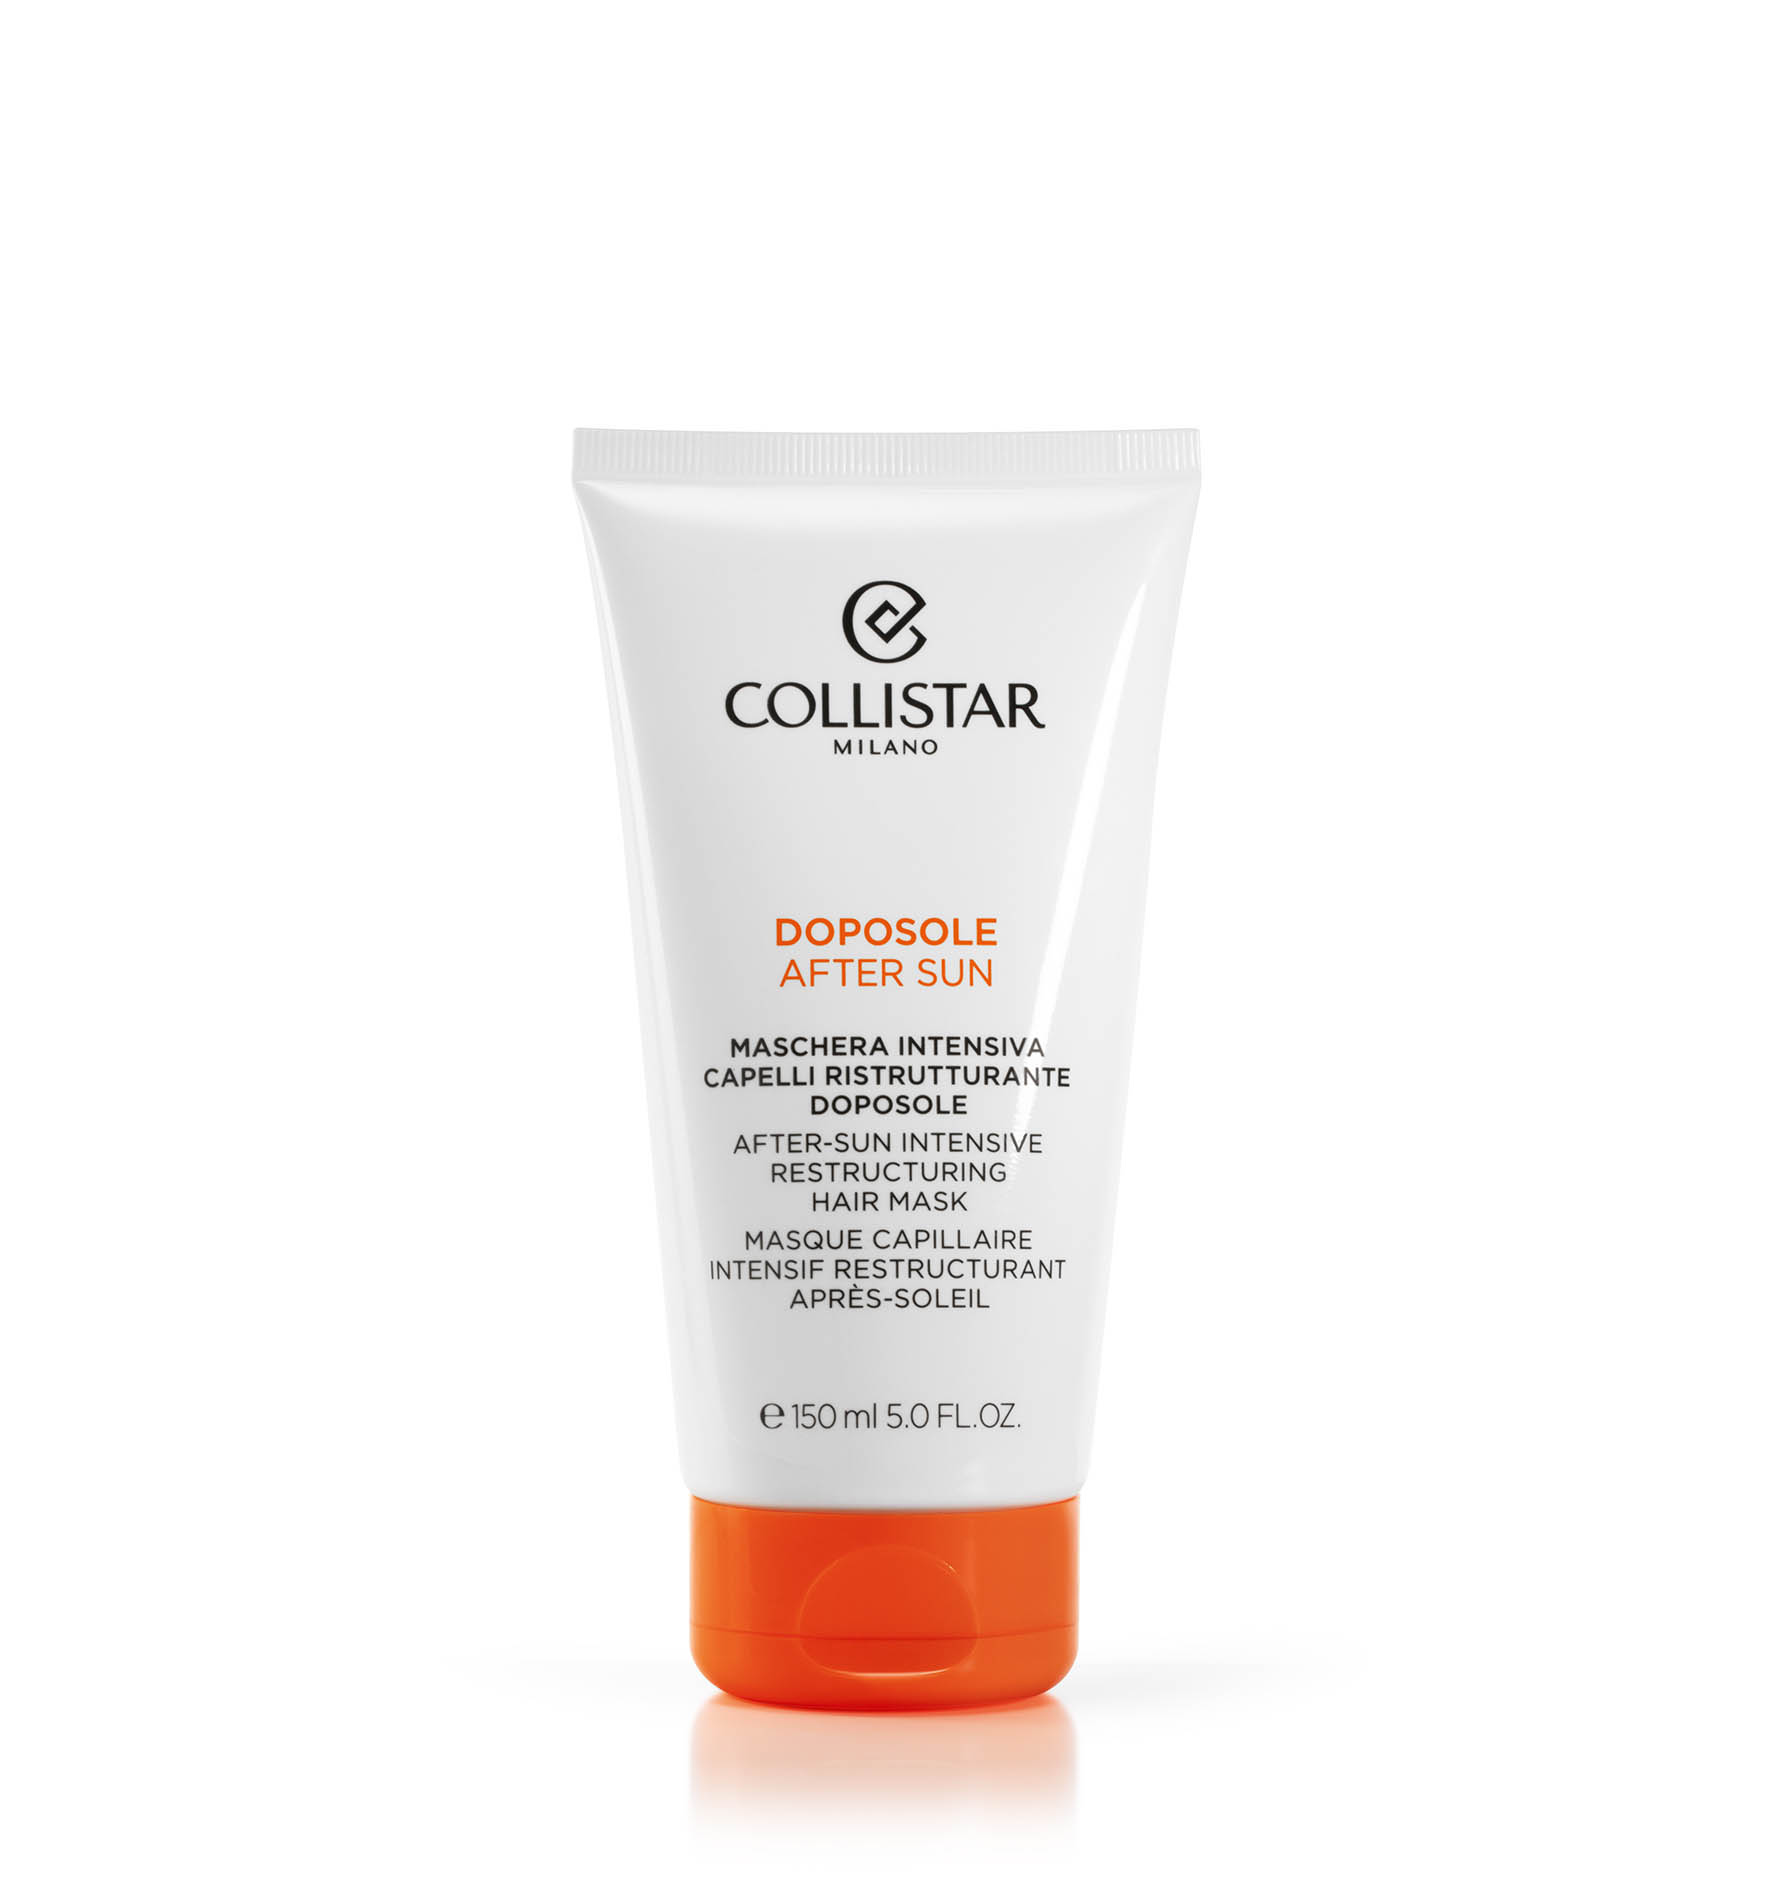 AFTER-SUN INTENSIVE RESTRUCTURING HAIR MASK - Sun protection | Collistar - Shop Online Ufficiale